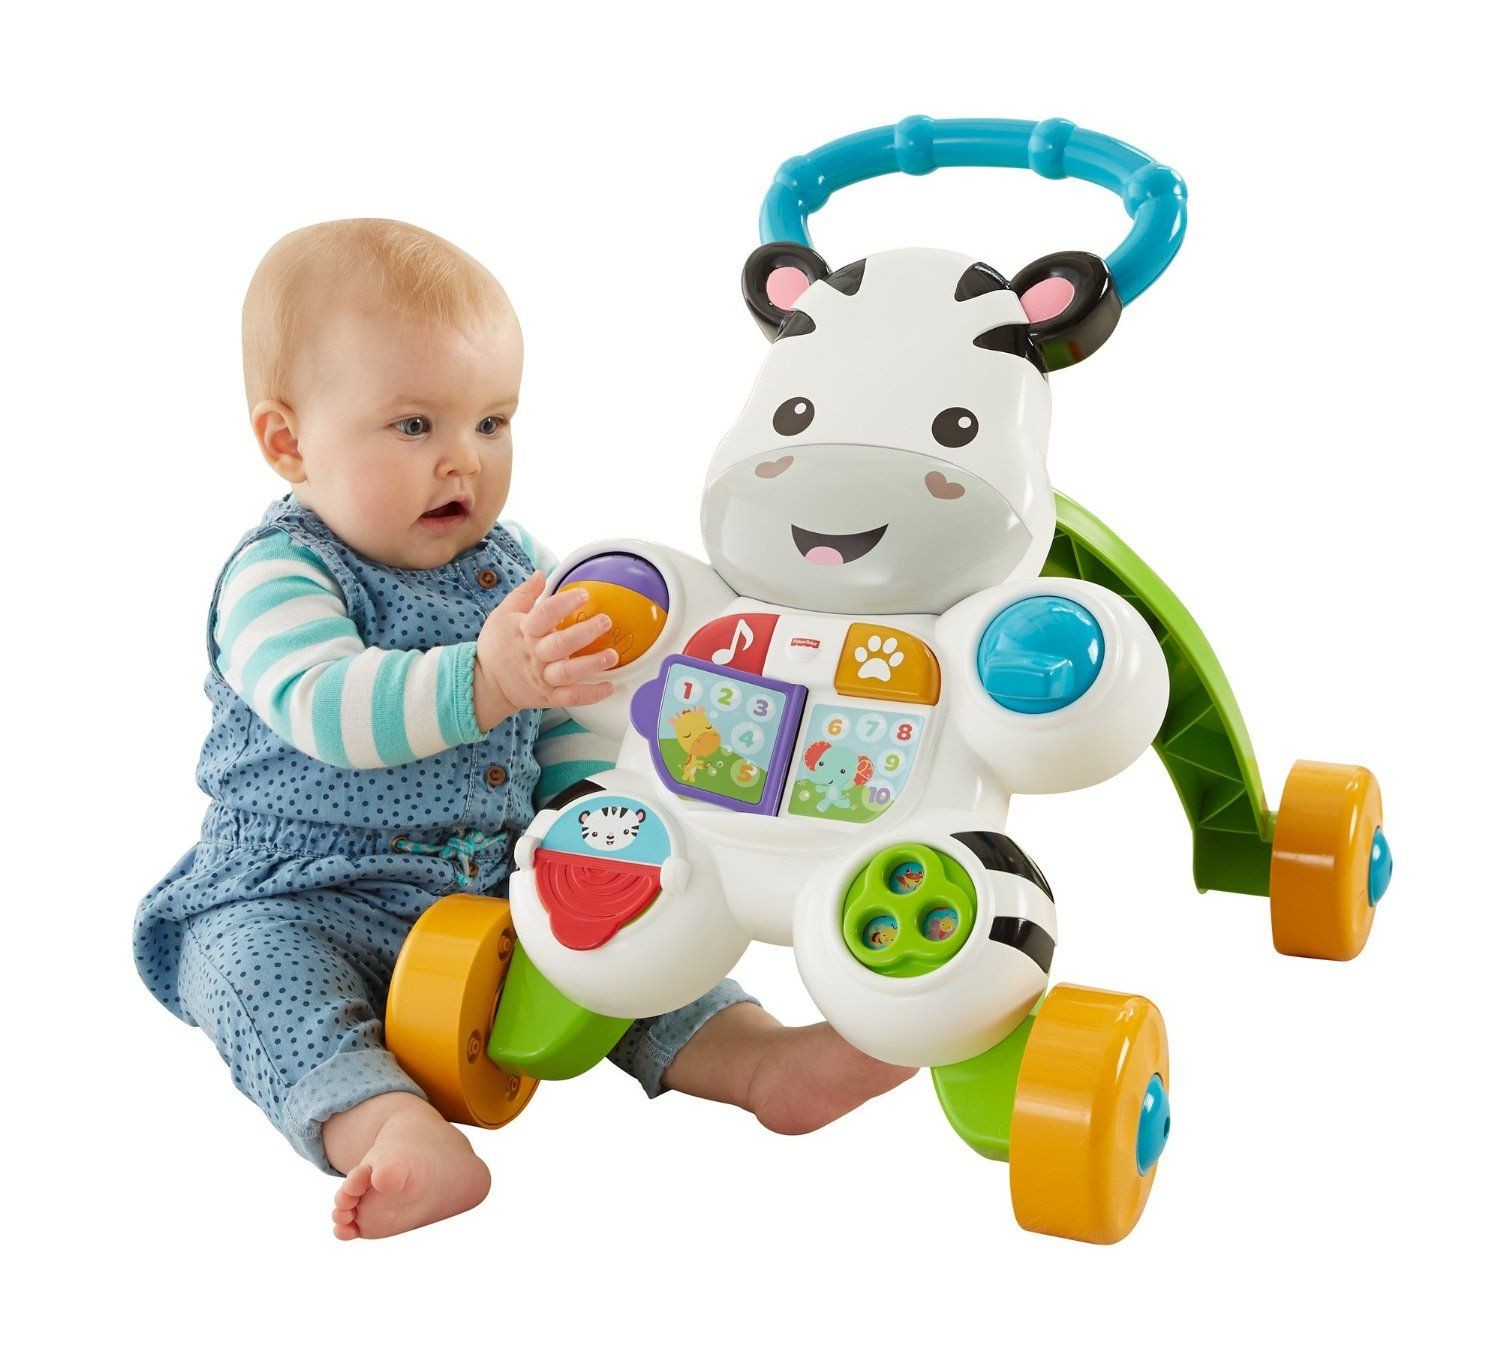 02 FISHER PRICE ZEBRA LEARN WITH ME